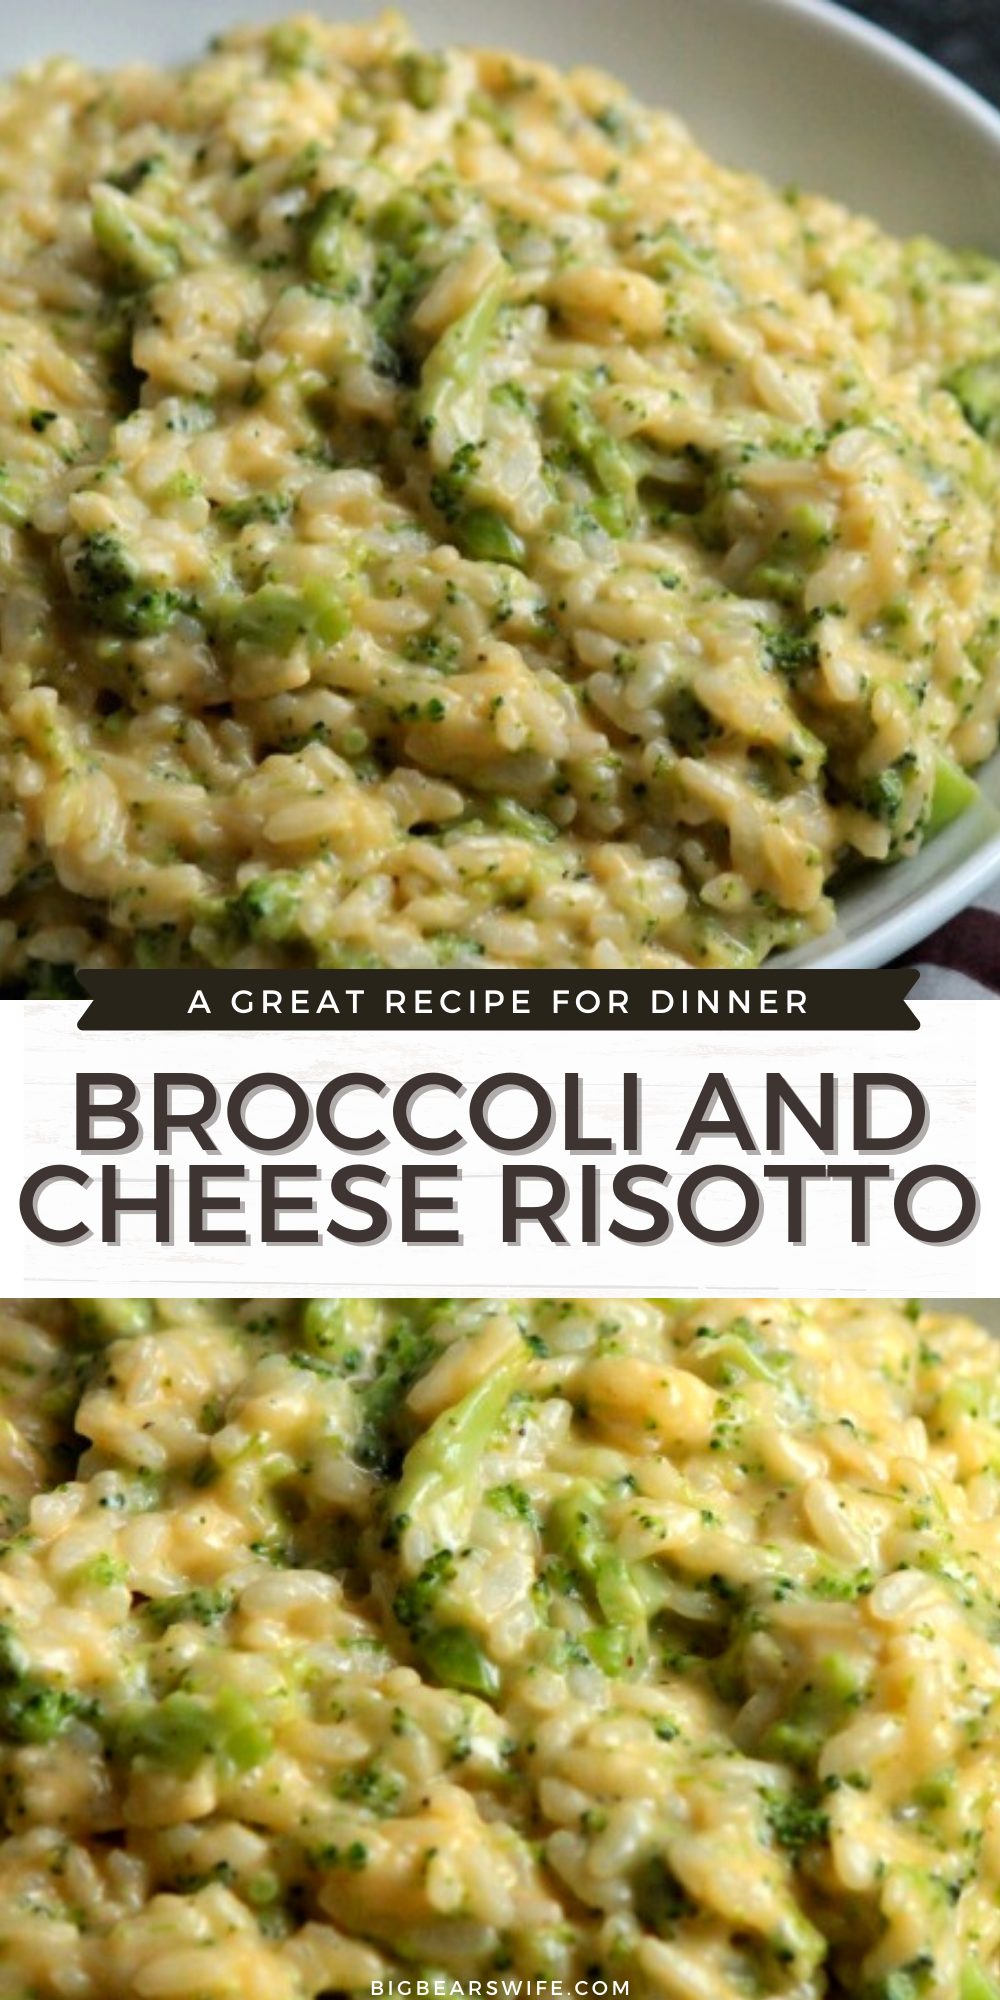 This Broccoli and Cheese Risotto is creamy and perfect with it’s cheese and bits of broccoli! It’s such a great comfort food and it’s easy to make at home!
 via @bigbearswife